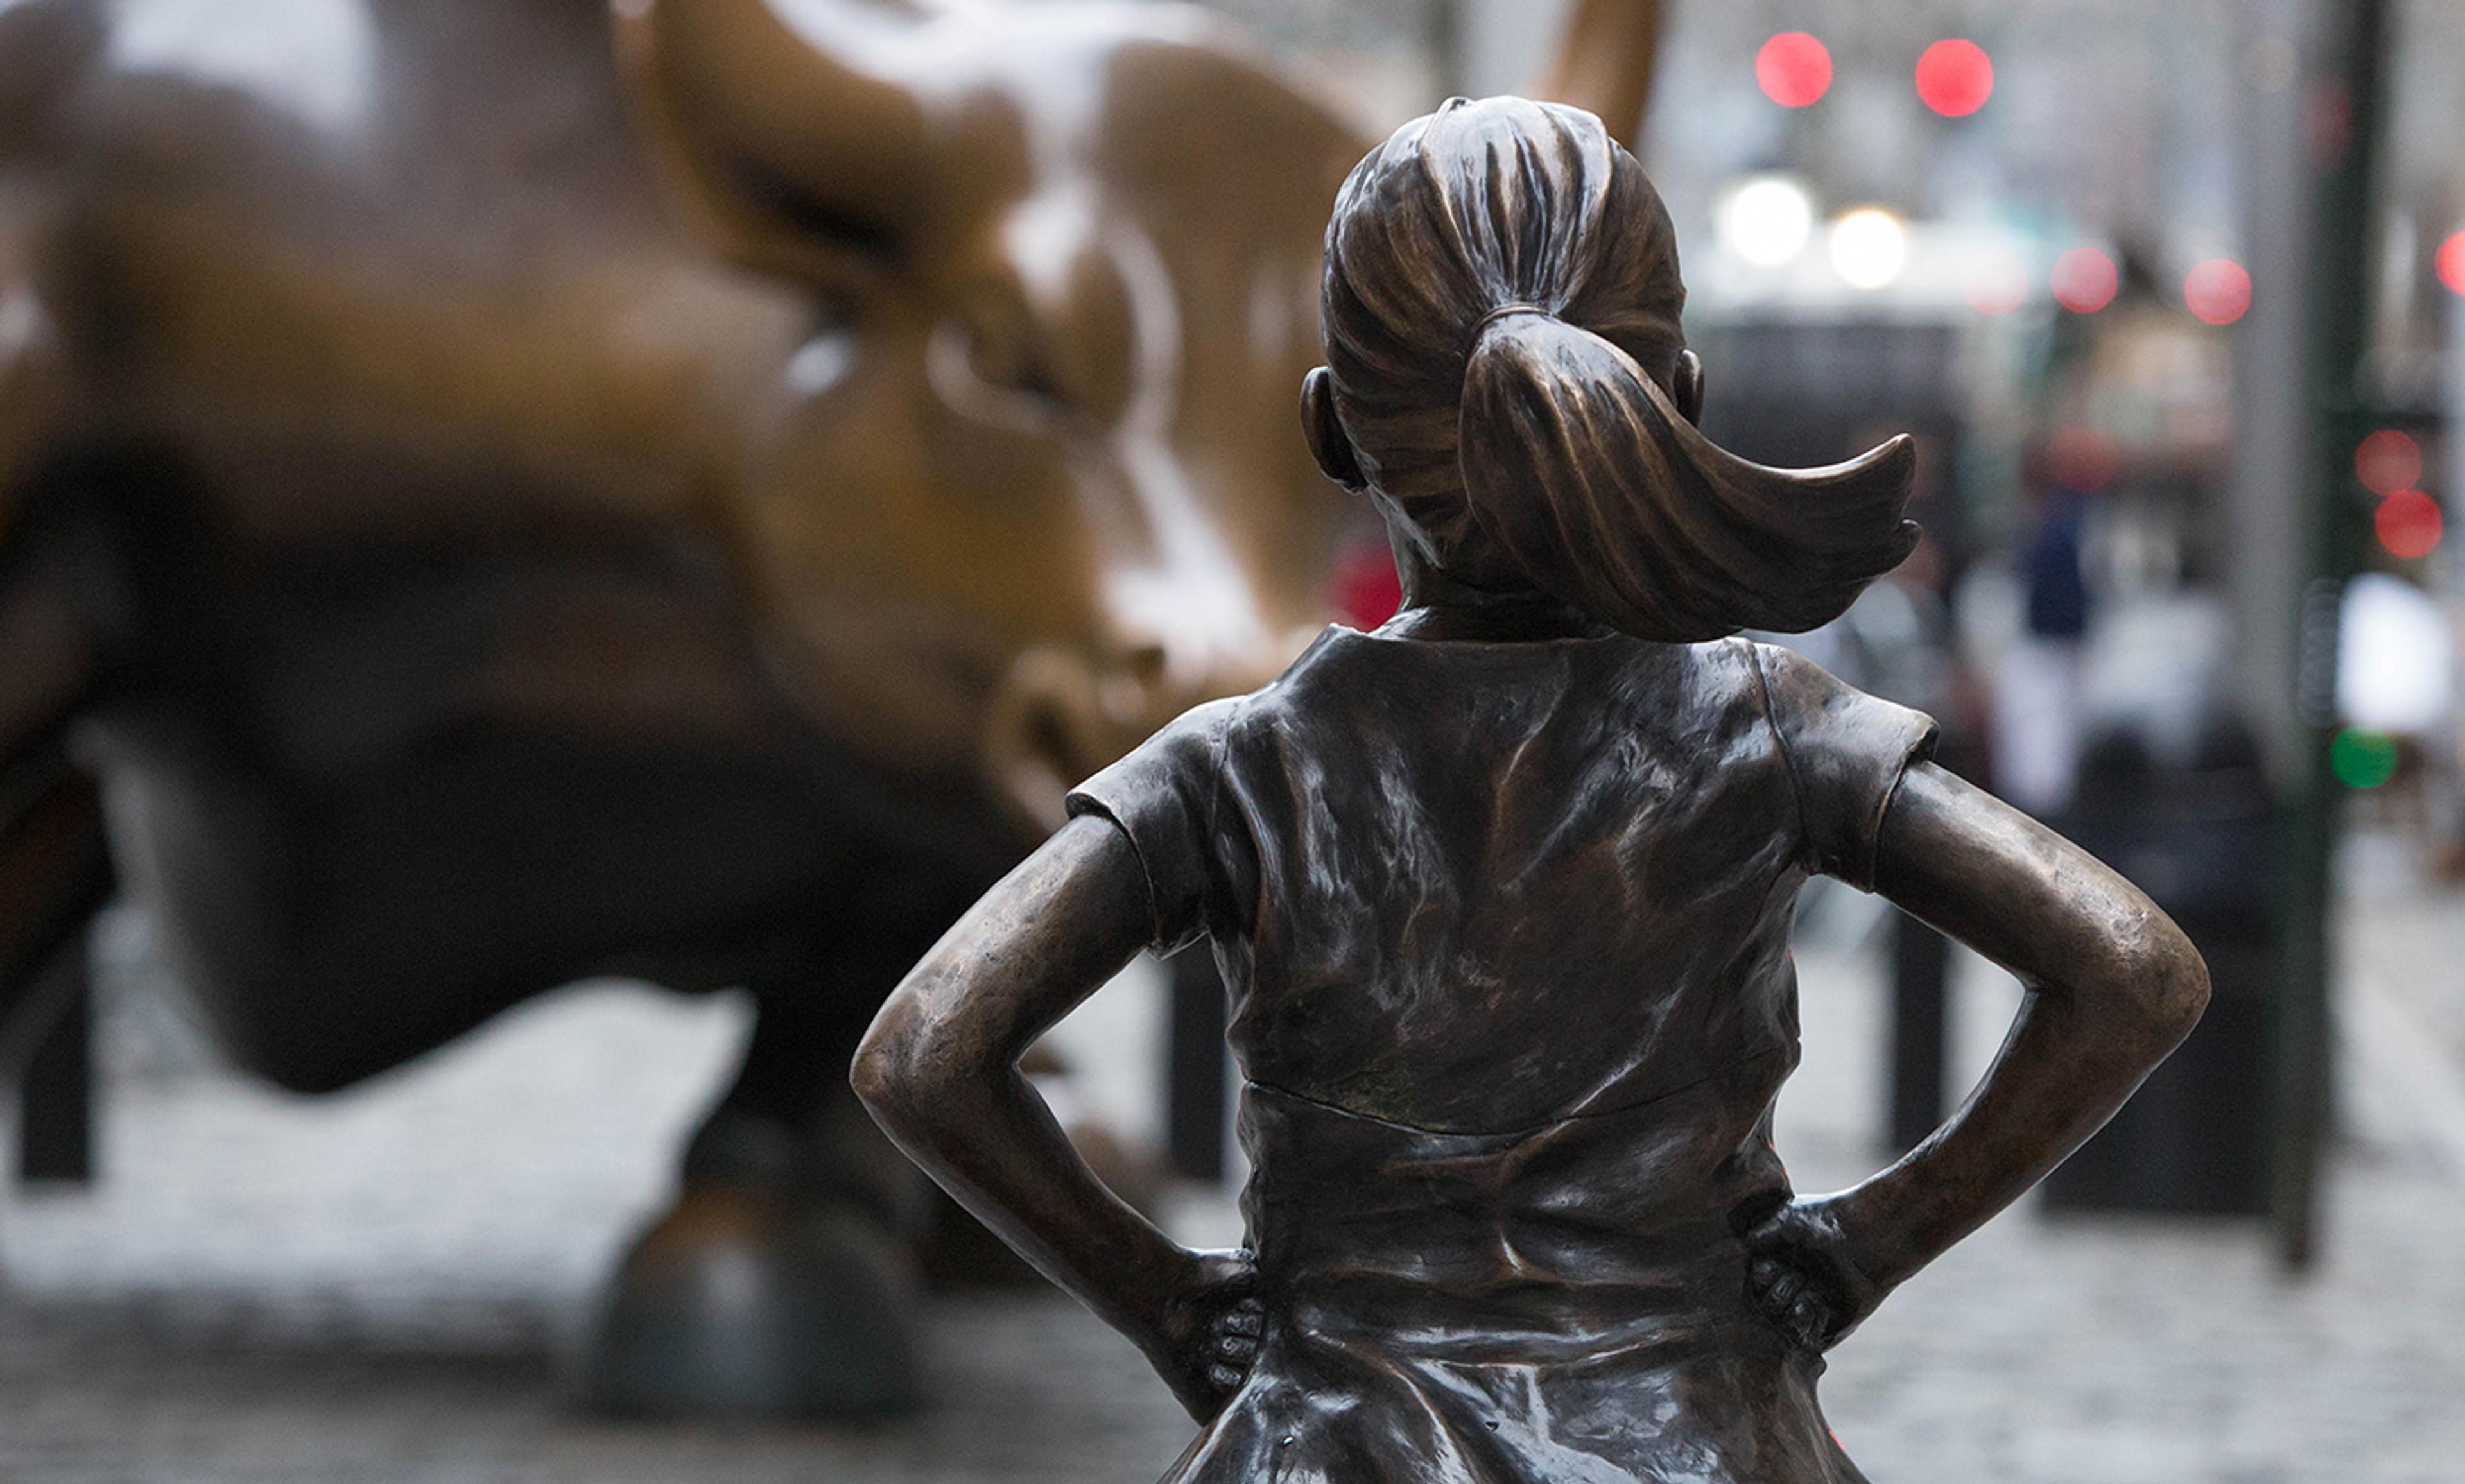 <p>Kristen Visbal’s <em>Fearless Girl</em> statue in front of Wall Street’s iconic bull. <em>Photo by Anthony Quintano/Flickr</em></p>